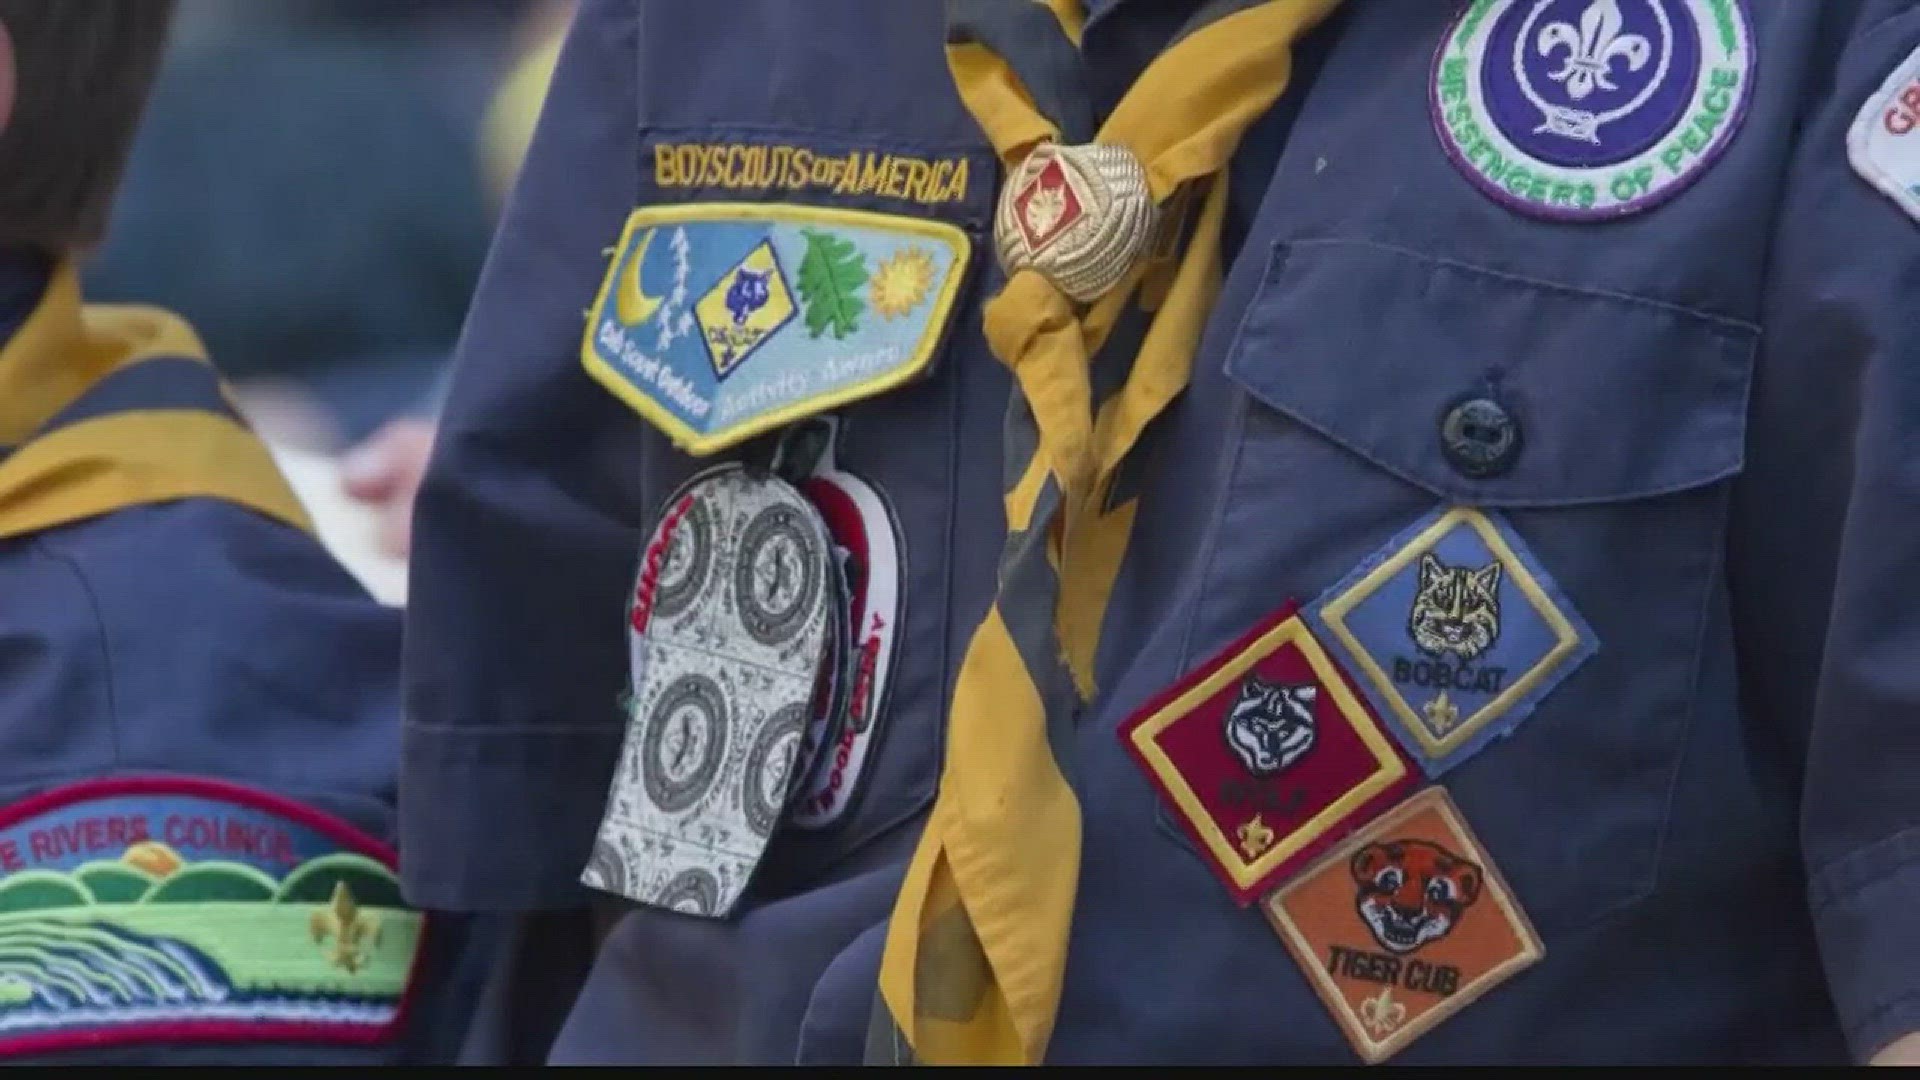 THE BOY SCOUTS HAVE ANNOUNCED PLANS TO ADMIT GIRLS INTO THE CUB SCOUTS.	THE ORGANIZATION SAYS THEY ARE ALSO ESTABLISHING A NEW PROGRAM FOR OLDER GIRLS USING THE SAME CURRICULUM AS THE BOY SCOUTS.